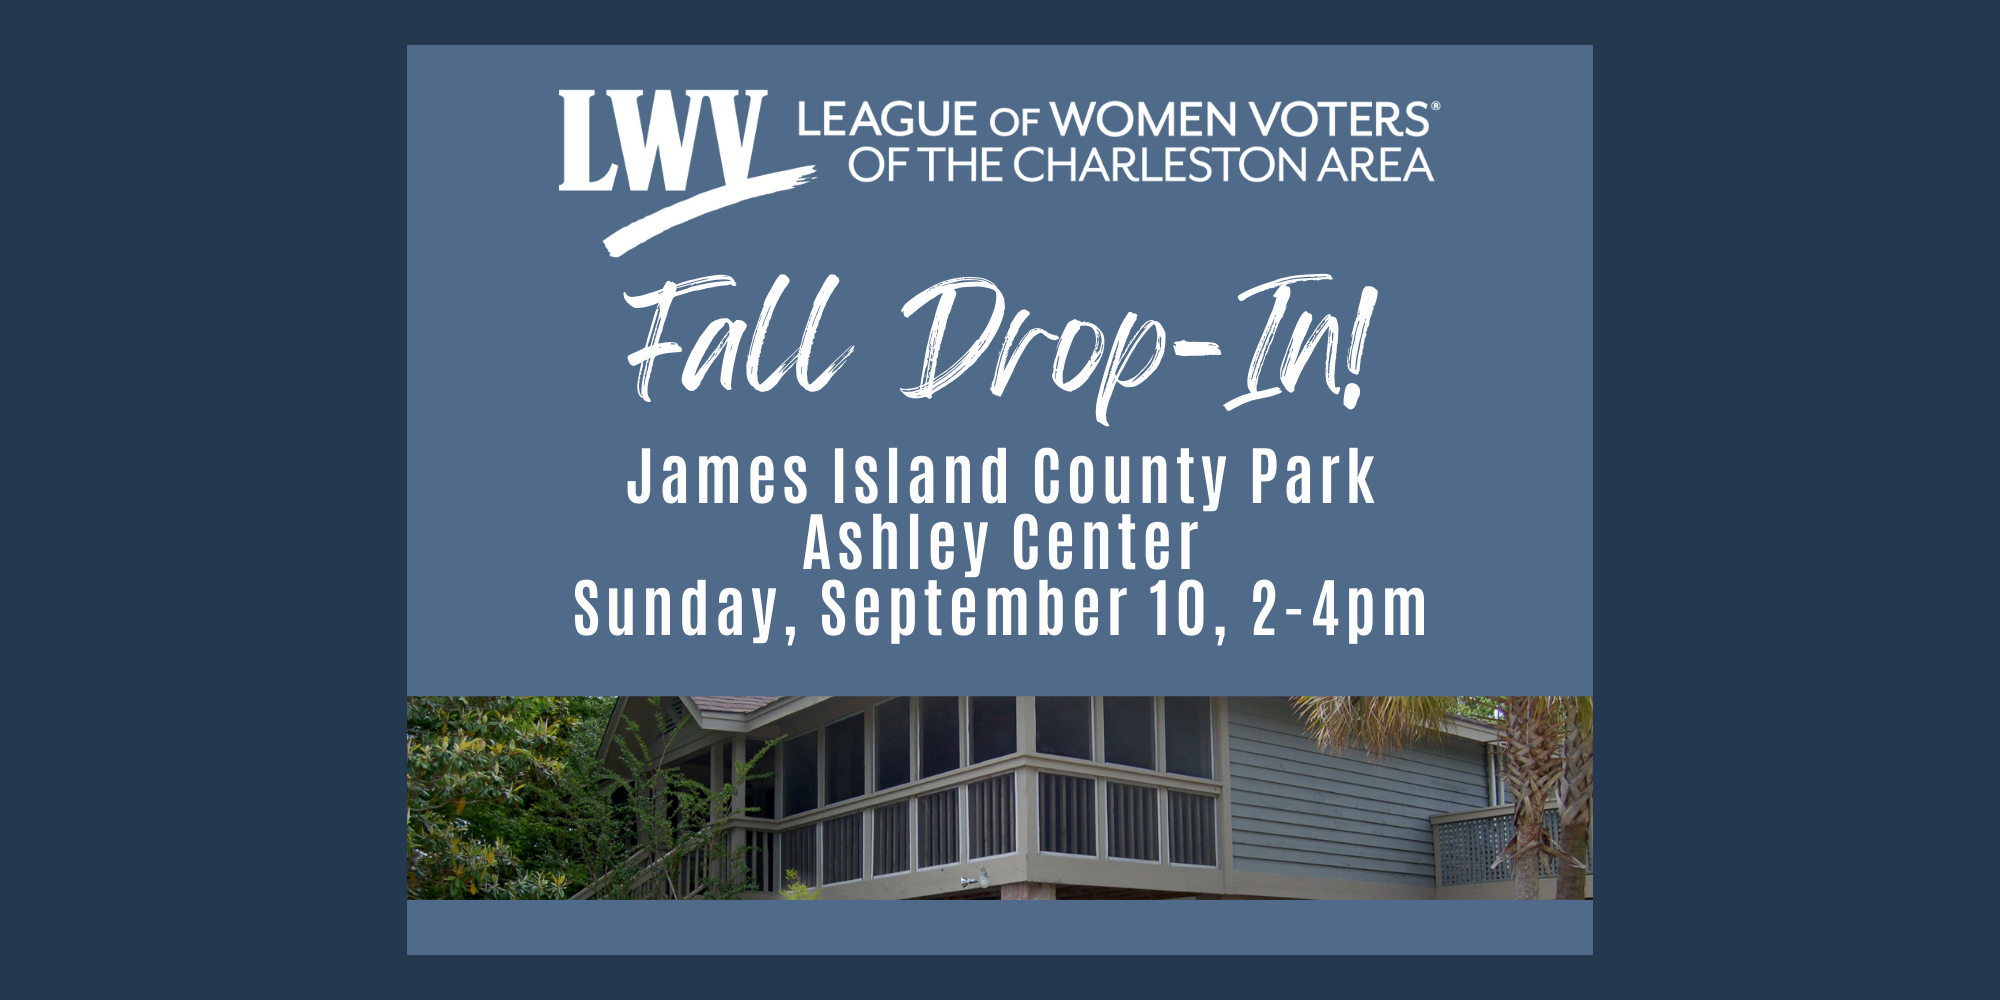 Fall Drop-In, September 10, 2-4pm at James Island County Park's Ashley Center